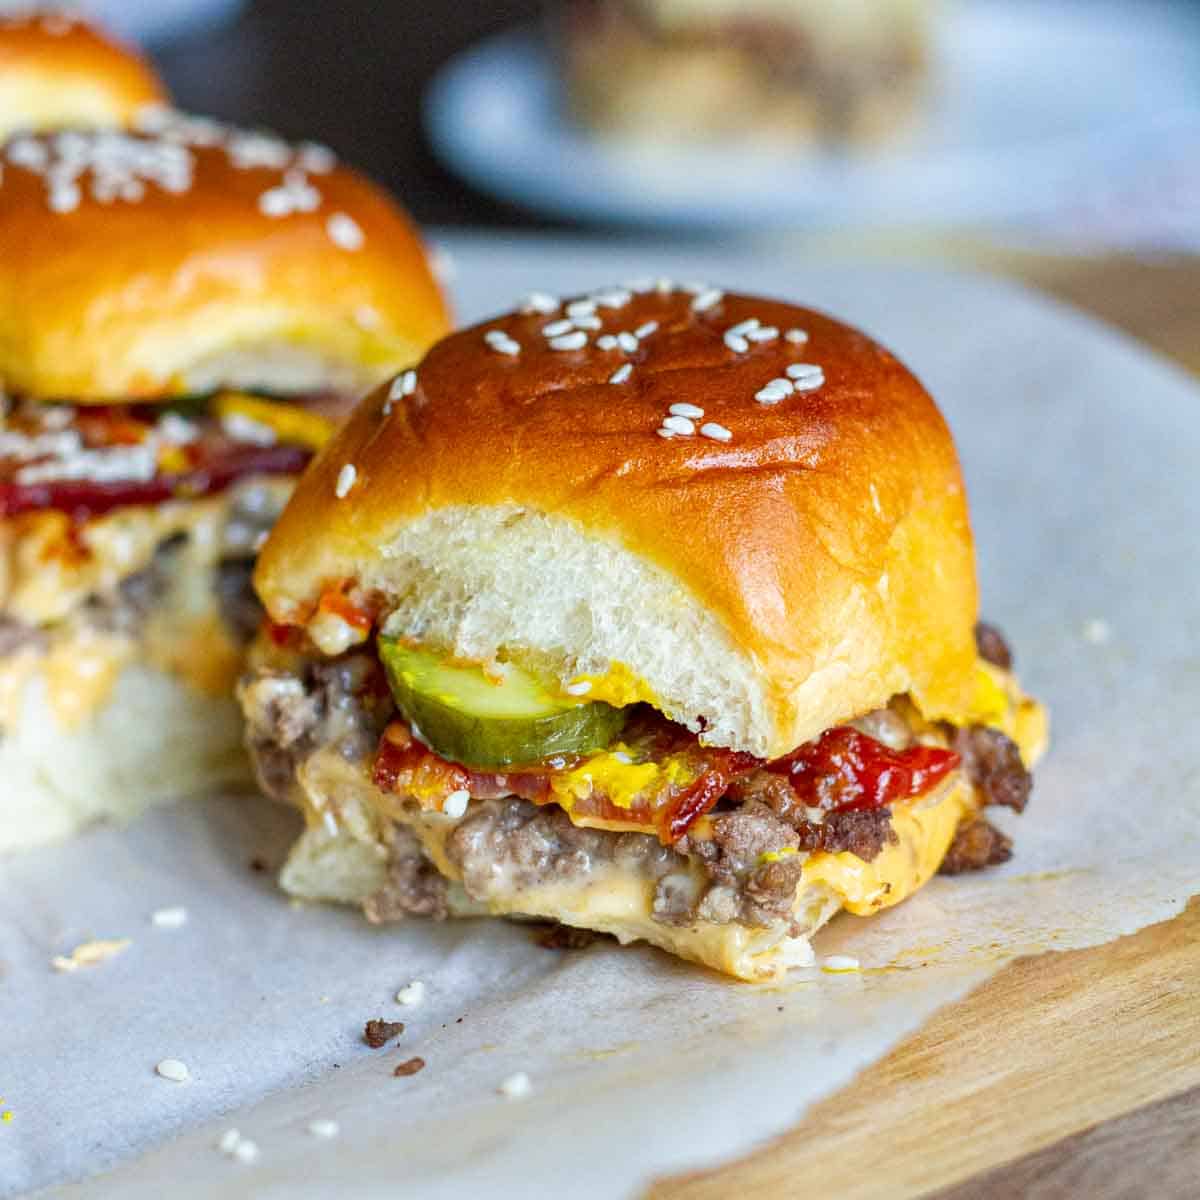 Bacon Cheeseburger Sliders with pickles